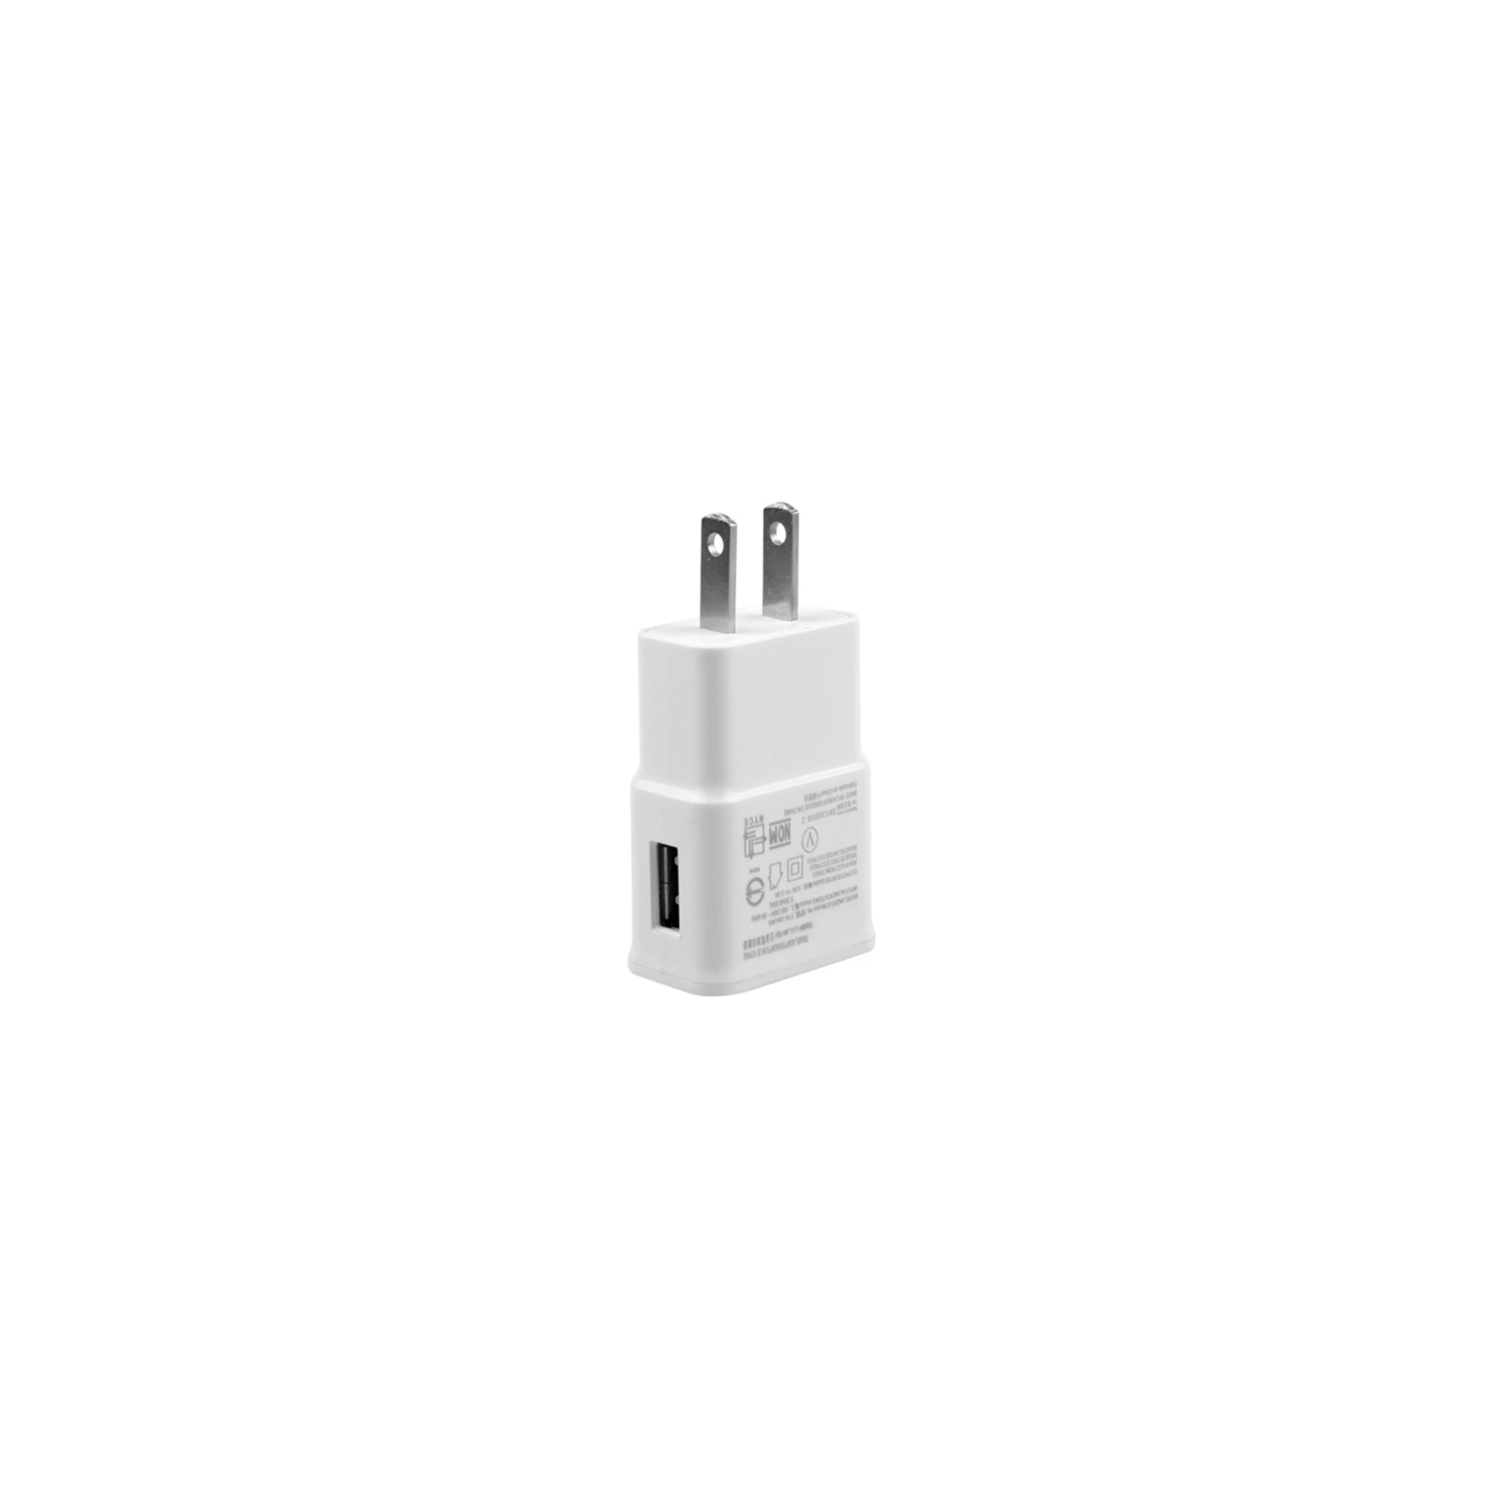 5V 2A 1/2/3-Port USB Wall Adapter Charger US Plug For Samsung iPhone LG HTC (White)